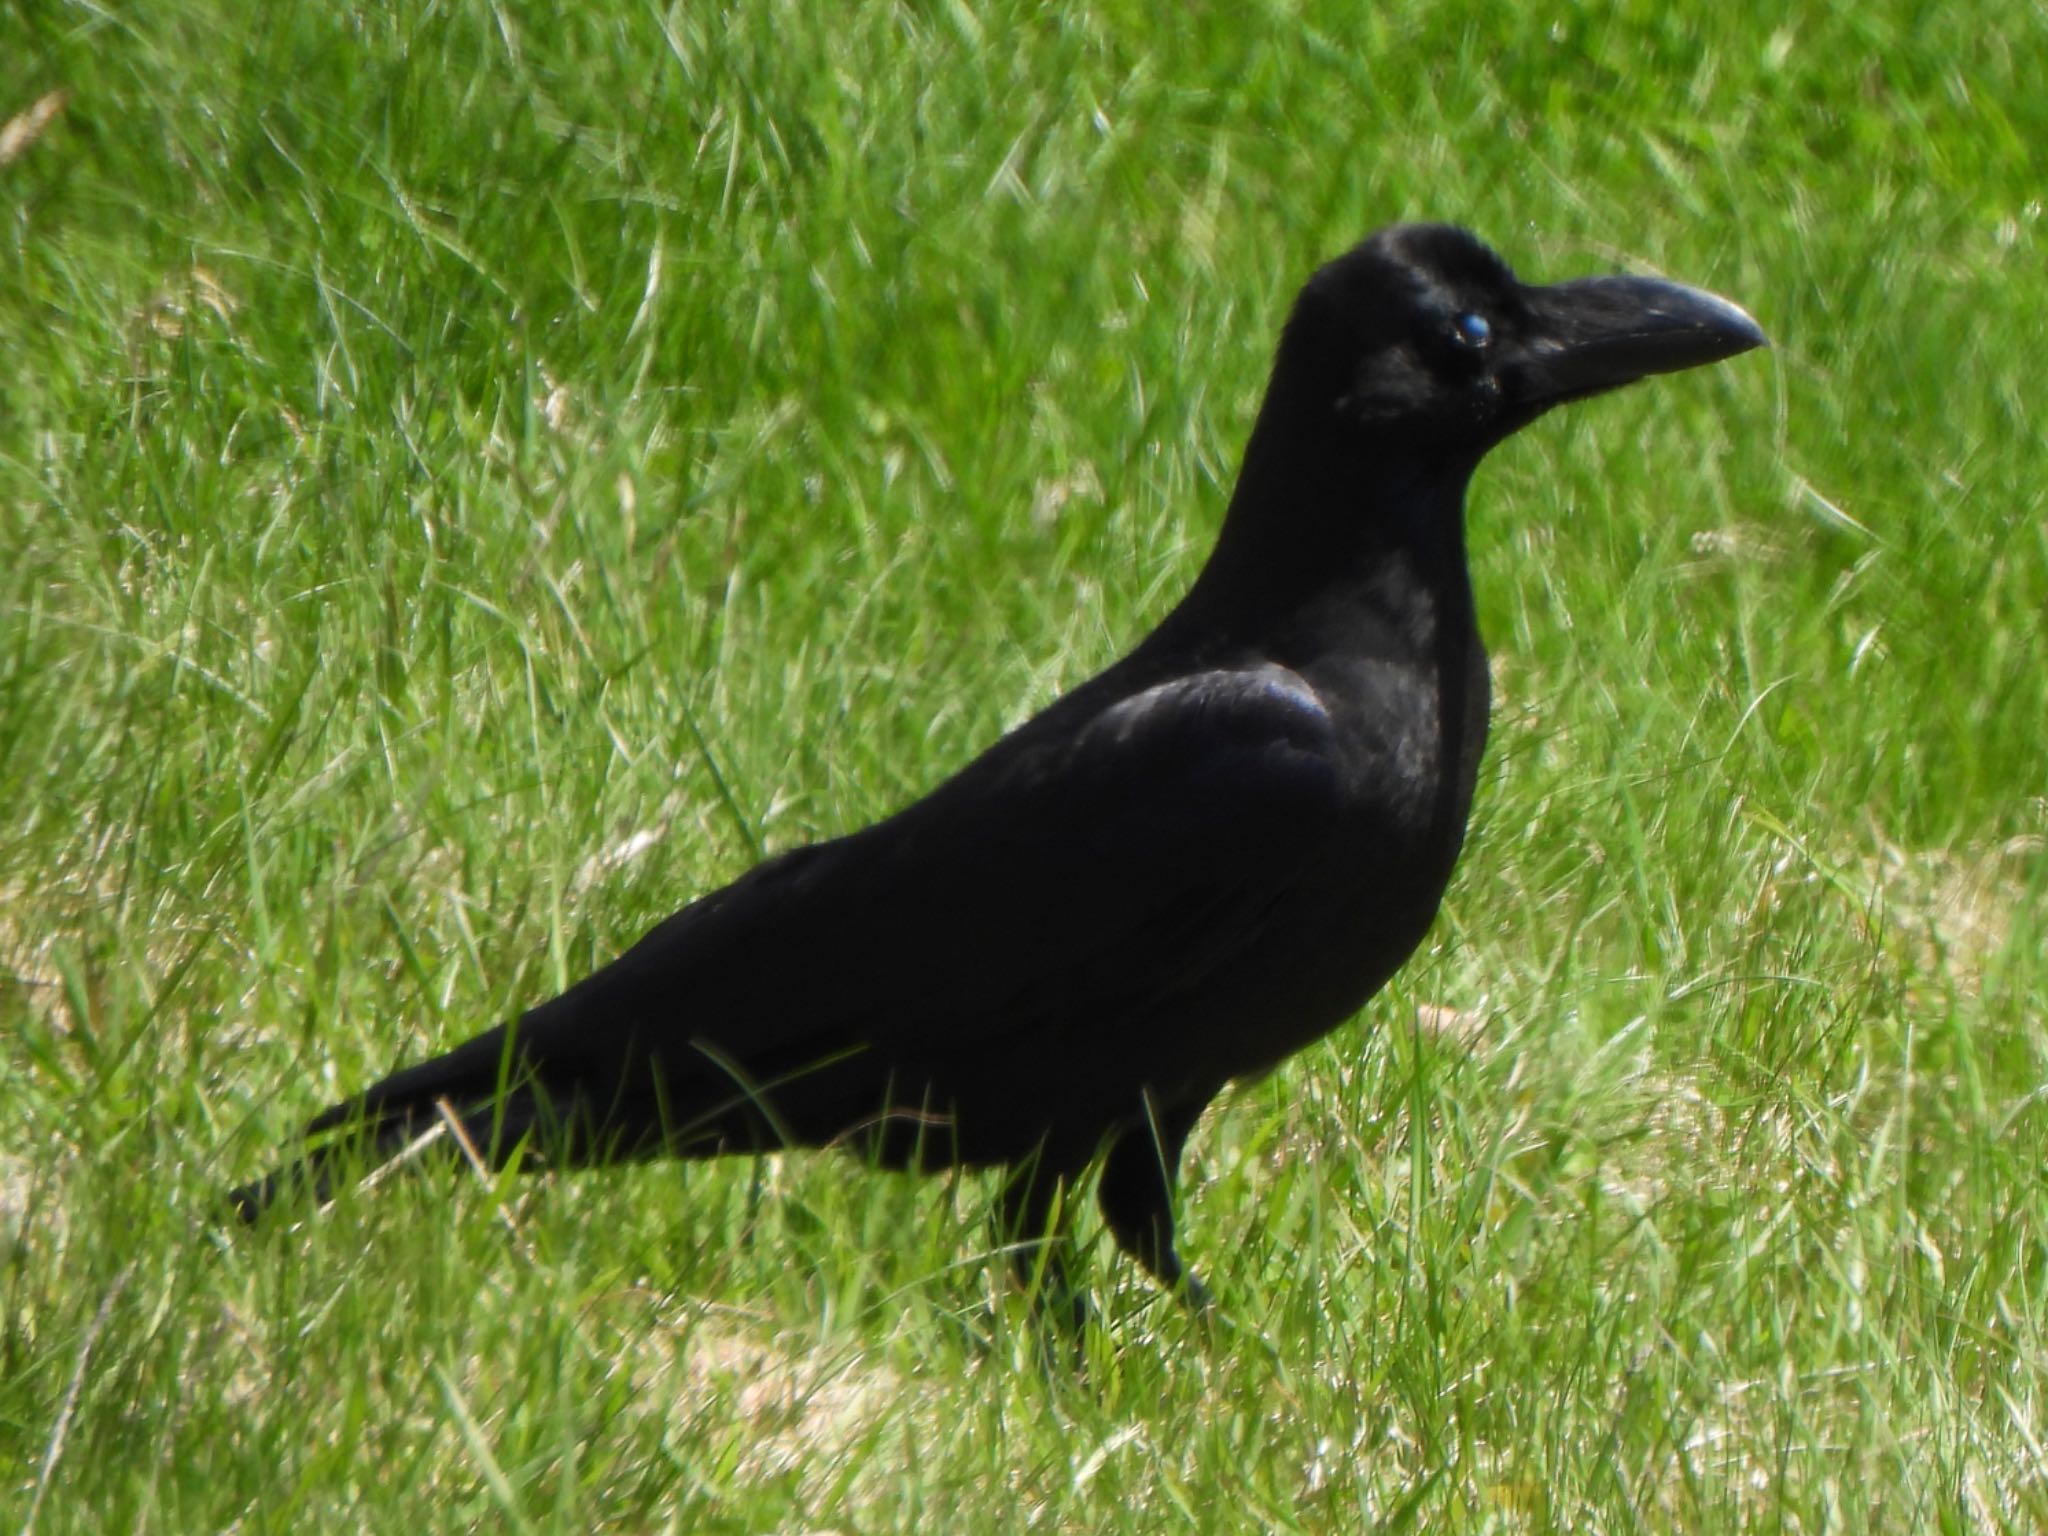 Photo of Large-billed Crow at まきば公園 by ツピ太郎